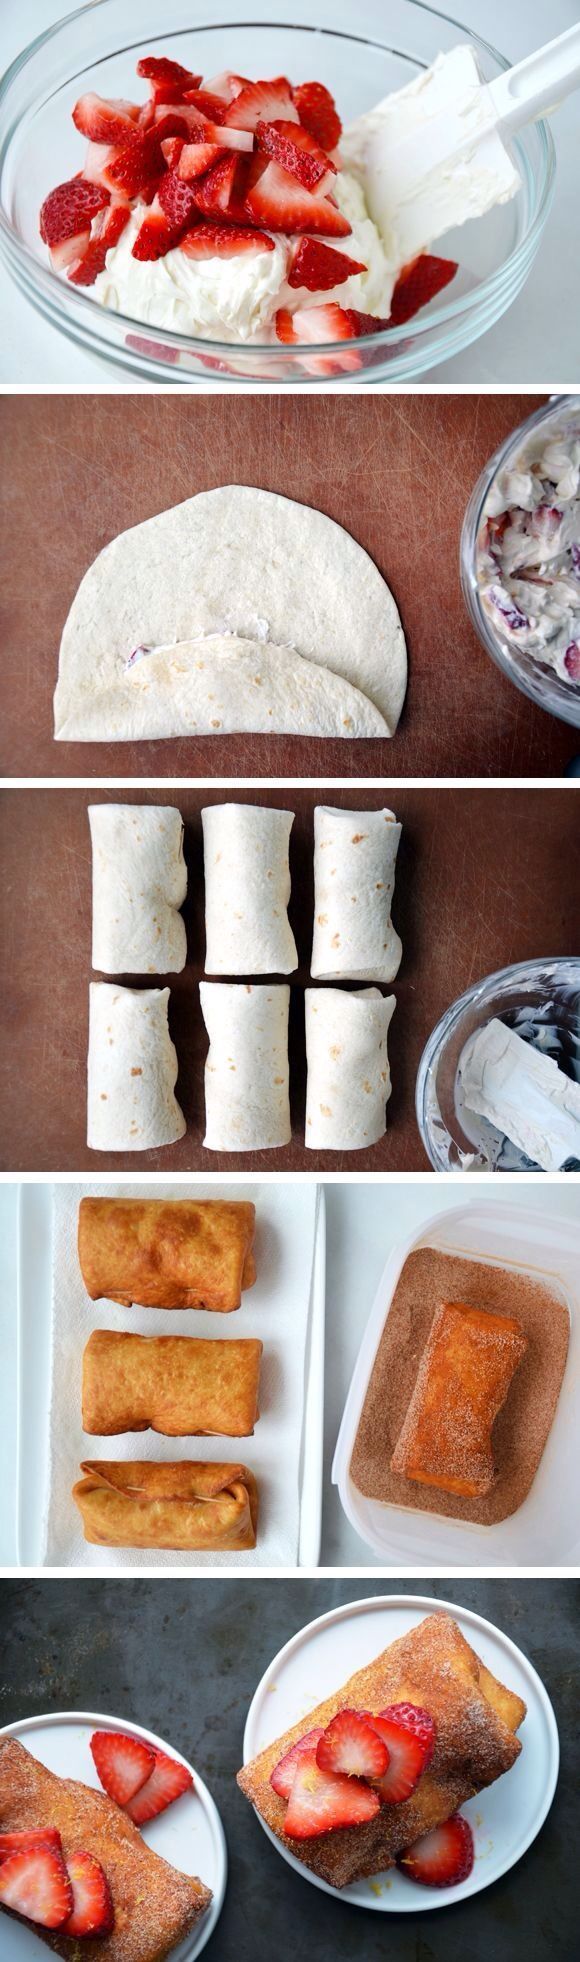 strawberry cheesecake chimichangas dessert. well yes, I will be making these tom